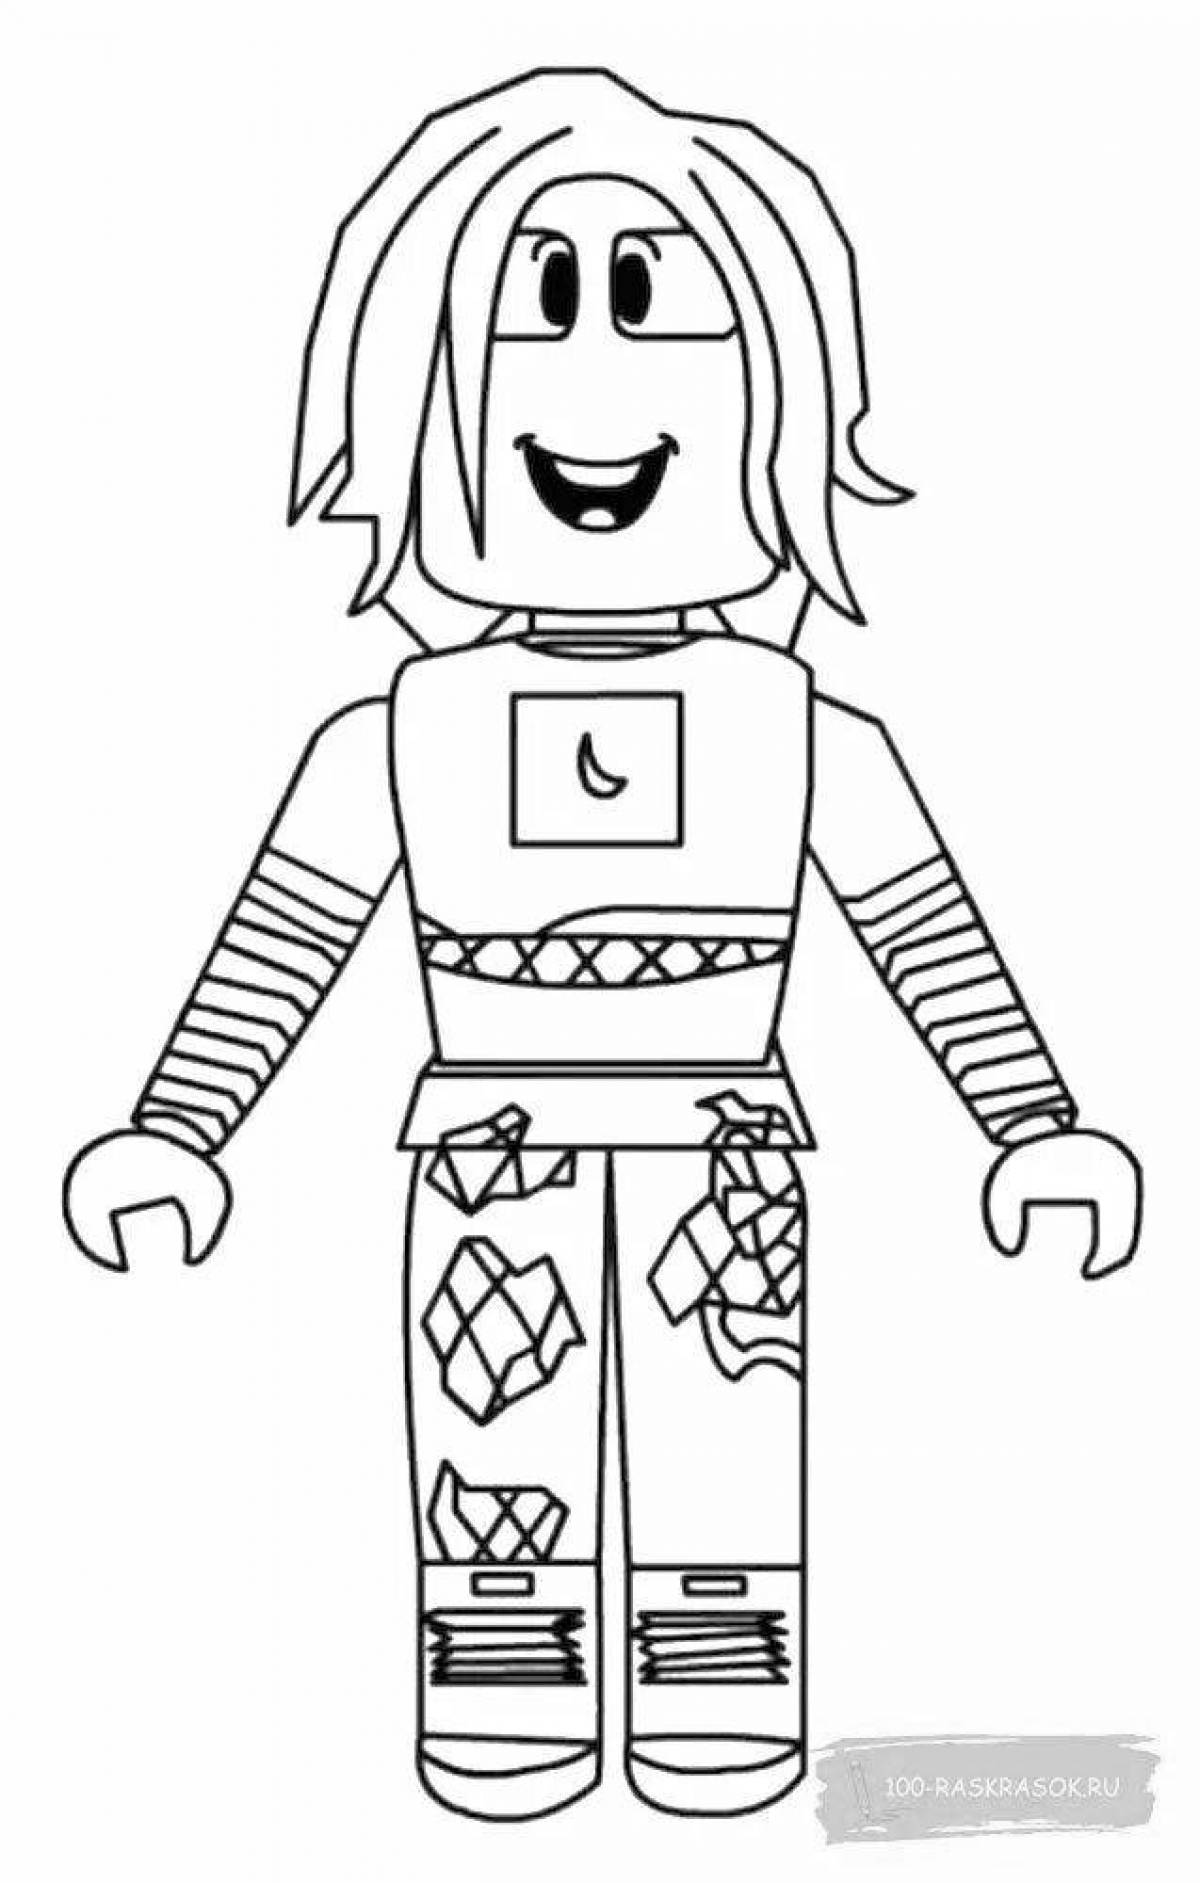 Exciting roblox man coloring book